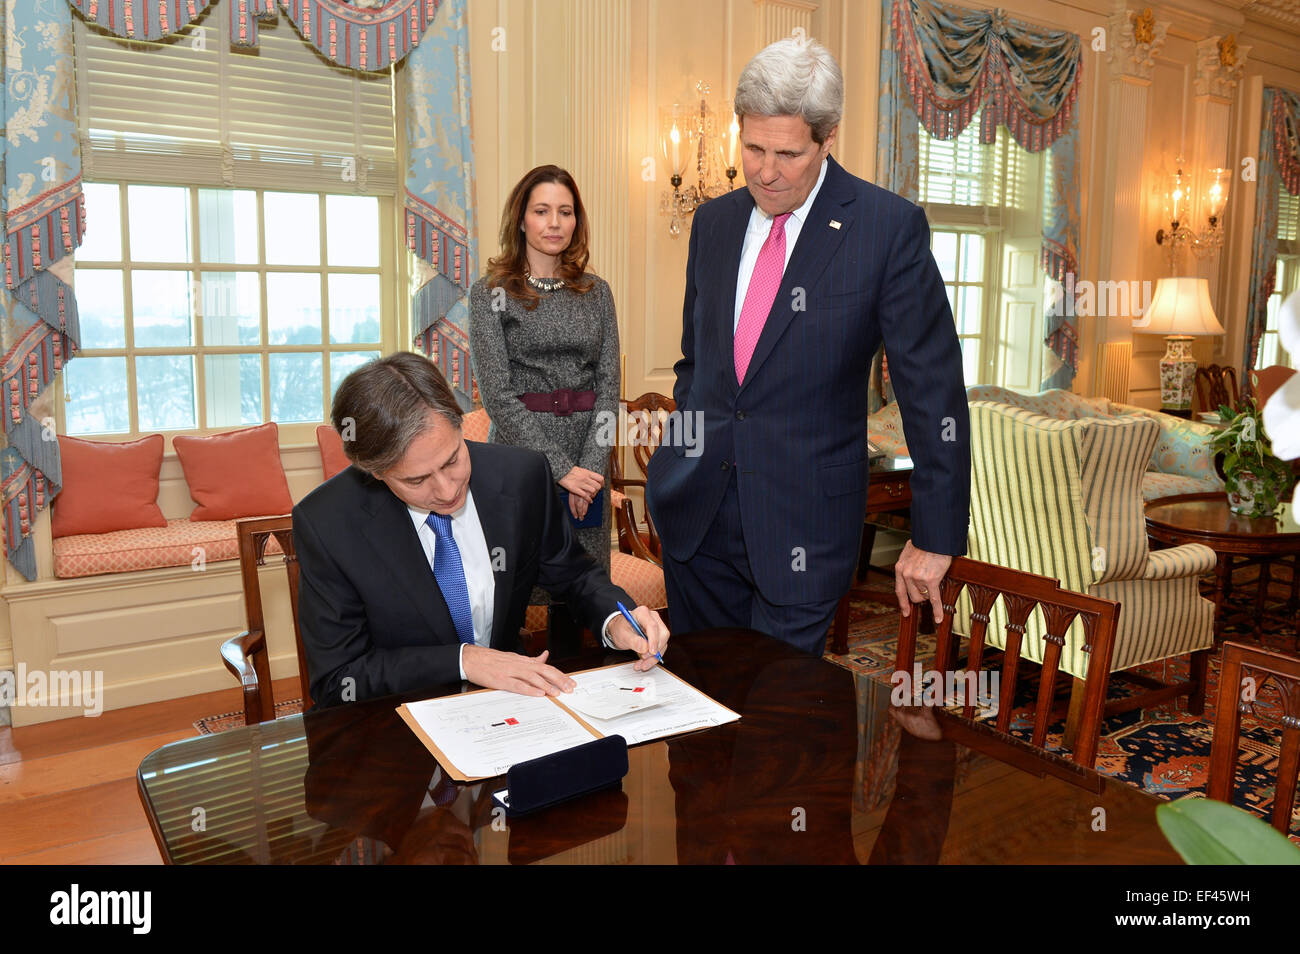 With his wife, Assistant Secretary of State for Educational and Cultural Affairs Evan Ryan, and U.S. Secretary of State John Kerry looking on, Antony Blinken signs his appointment papers to become the next Deputy Secretary of State, at the U.S. Department of State in Washington, D.C., on January 9, 2015. Stock Photo